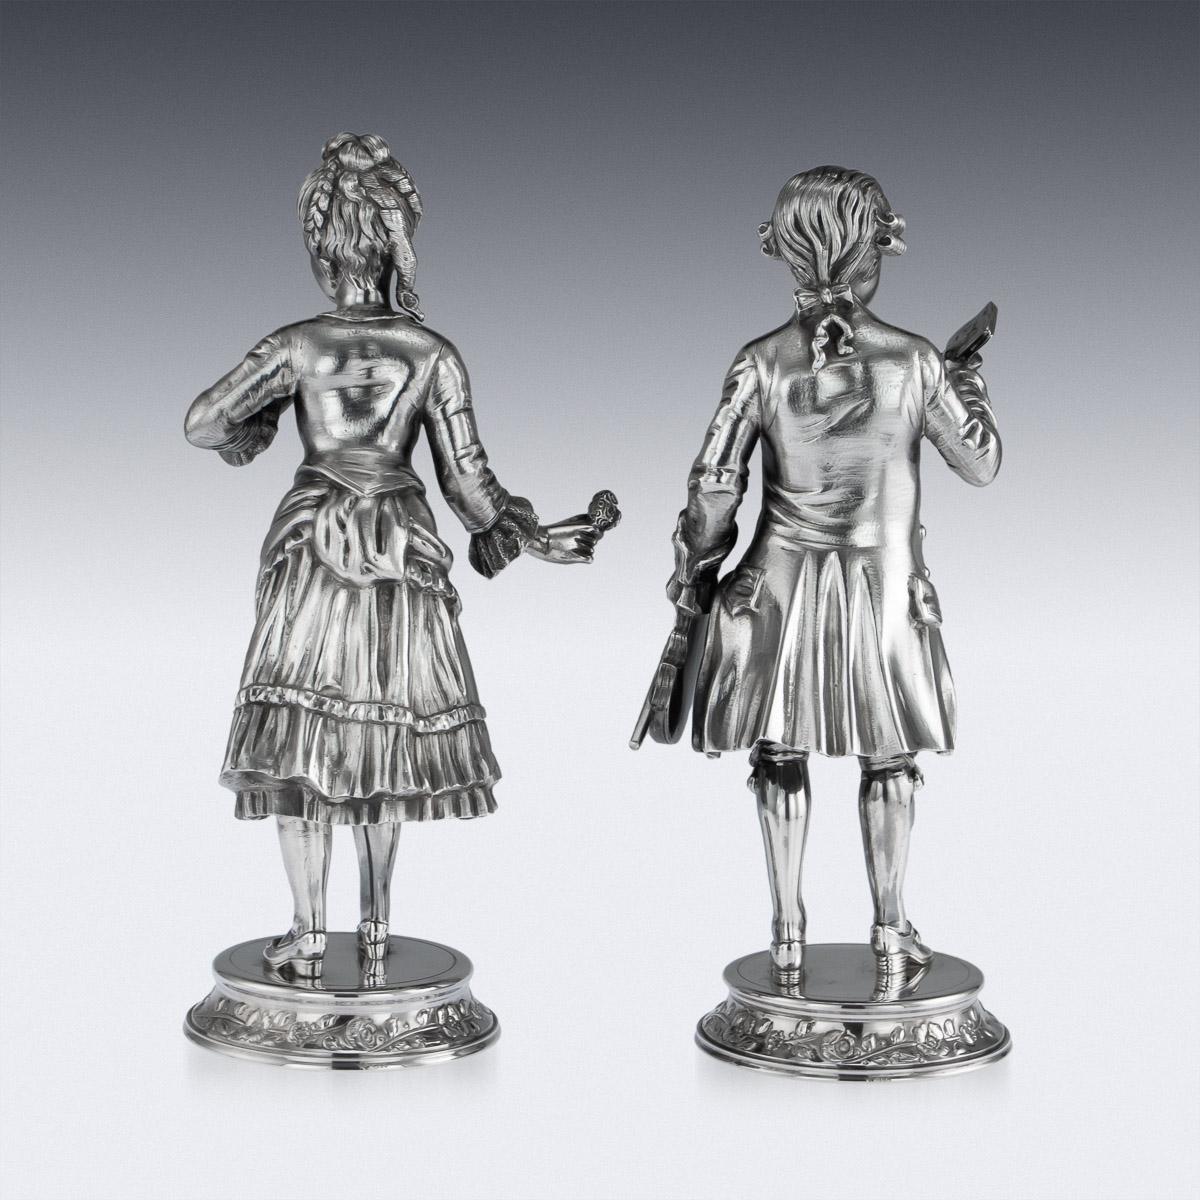 English 20th Century Solid Silver Pair of Figures by Garrard & Co, circa 1986